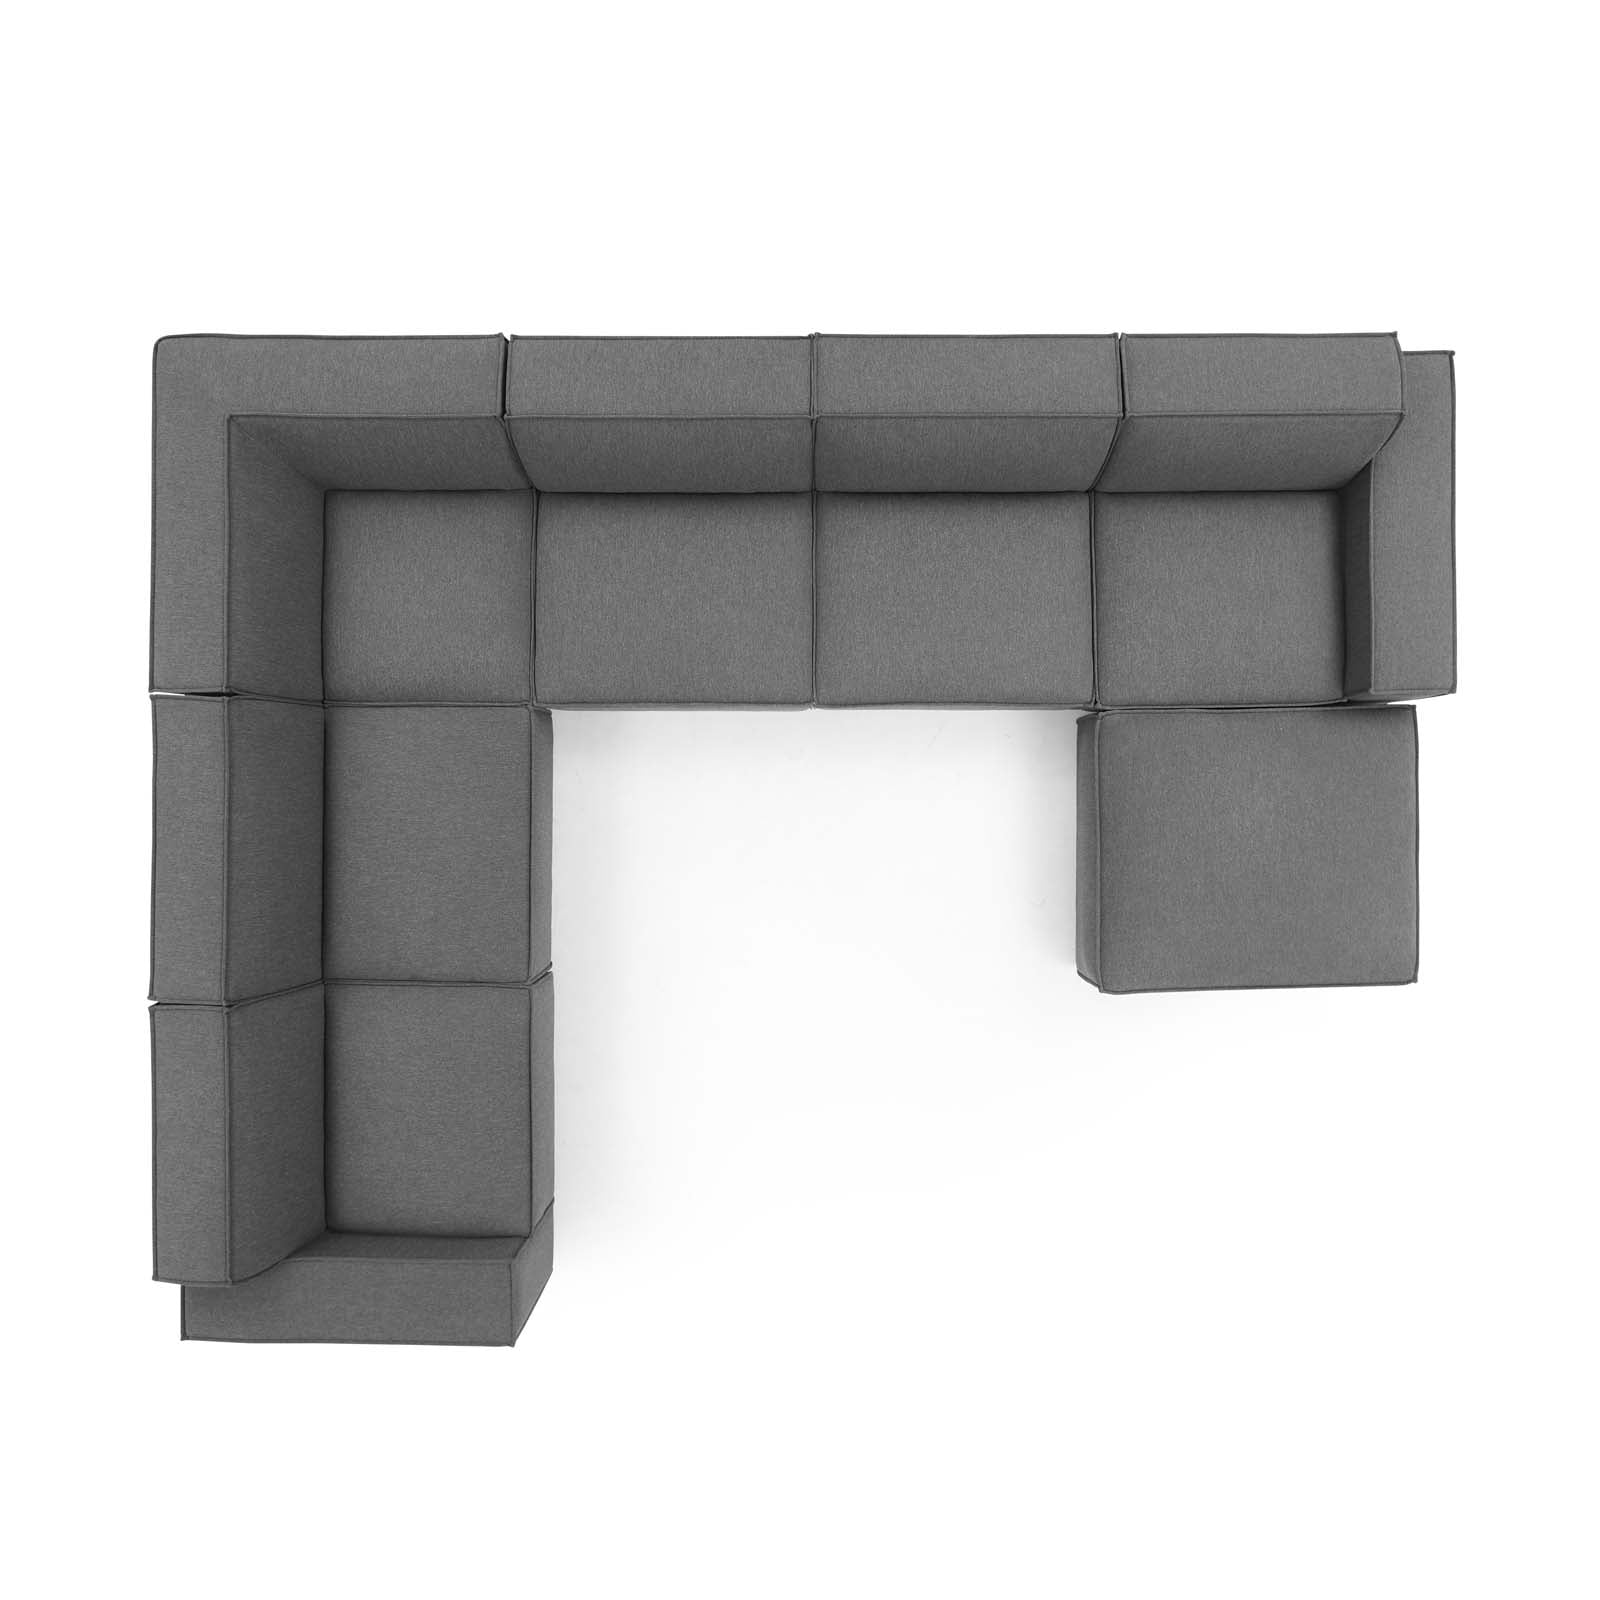 Modway Sectional Sofas - Restore 7-Piece Sectional Sofa Charcoal